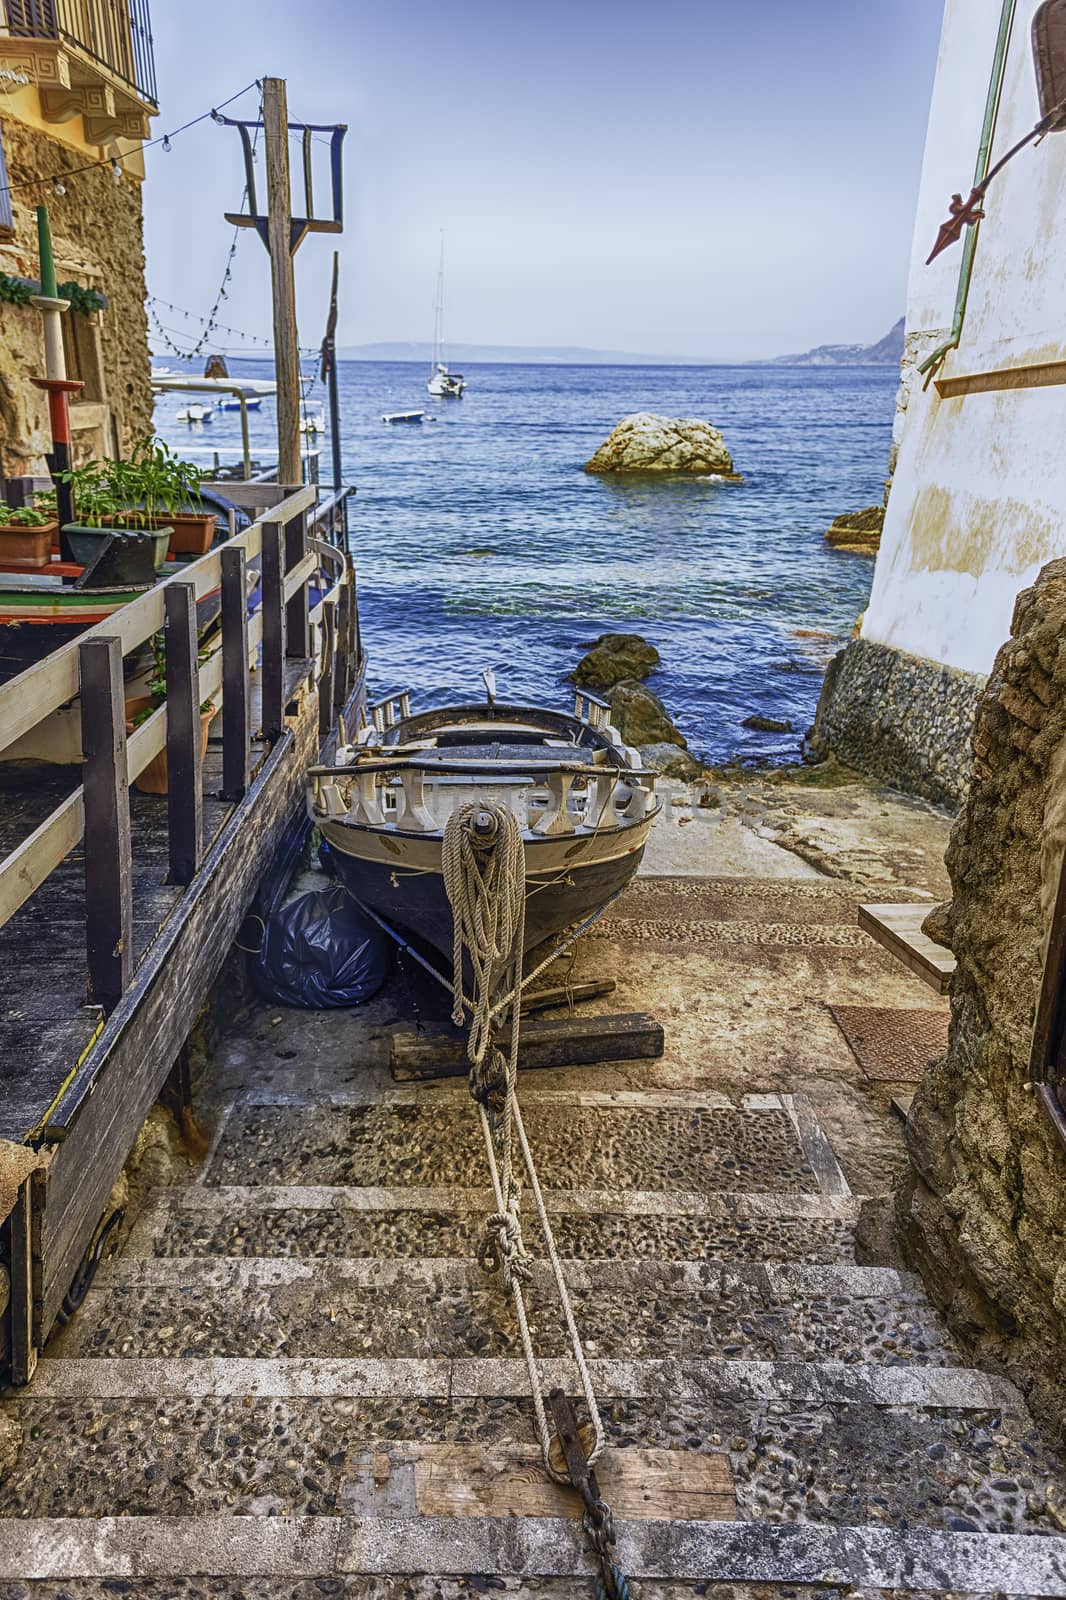 Picturesque streets and alleys in the seaside village, Scilla, I by marcorubino